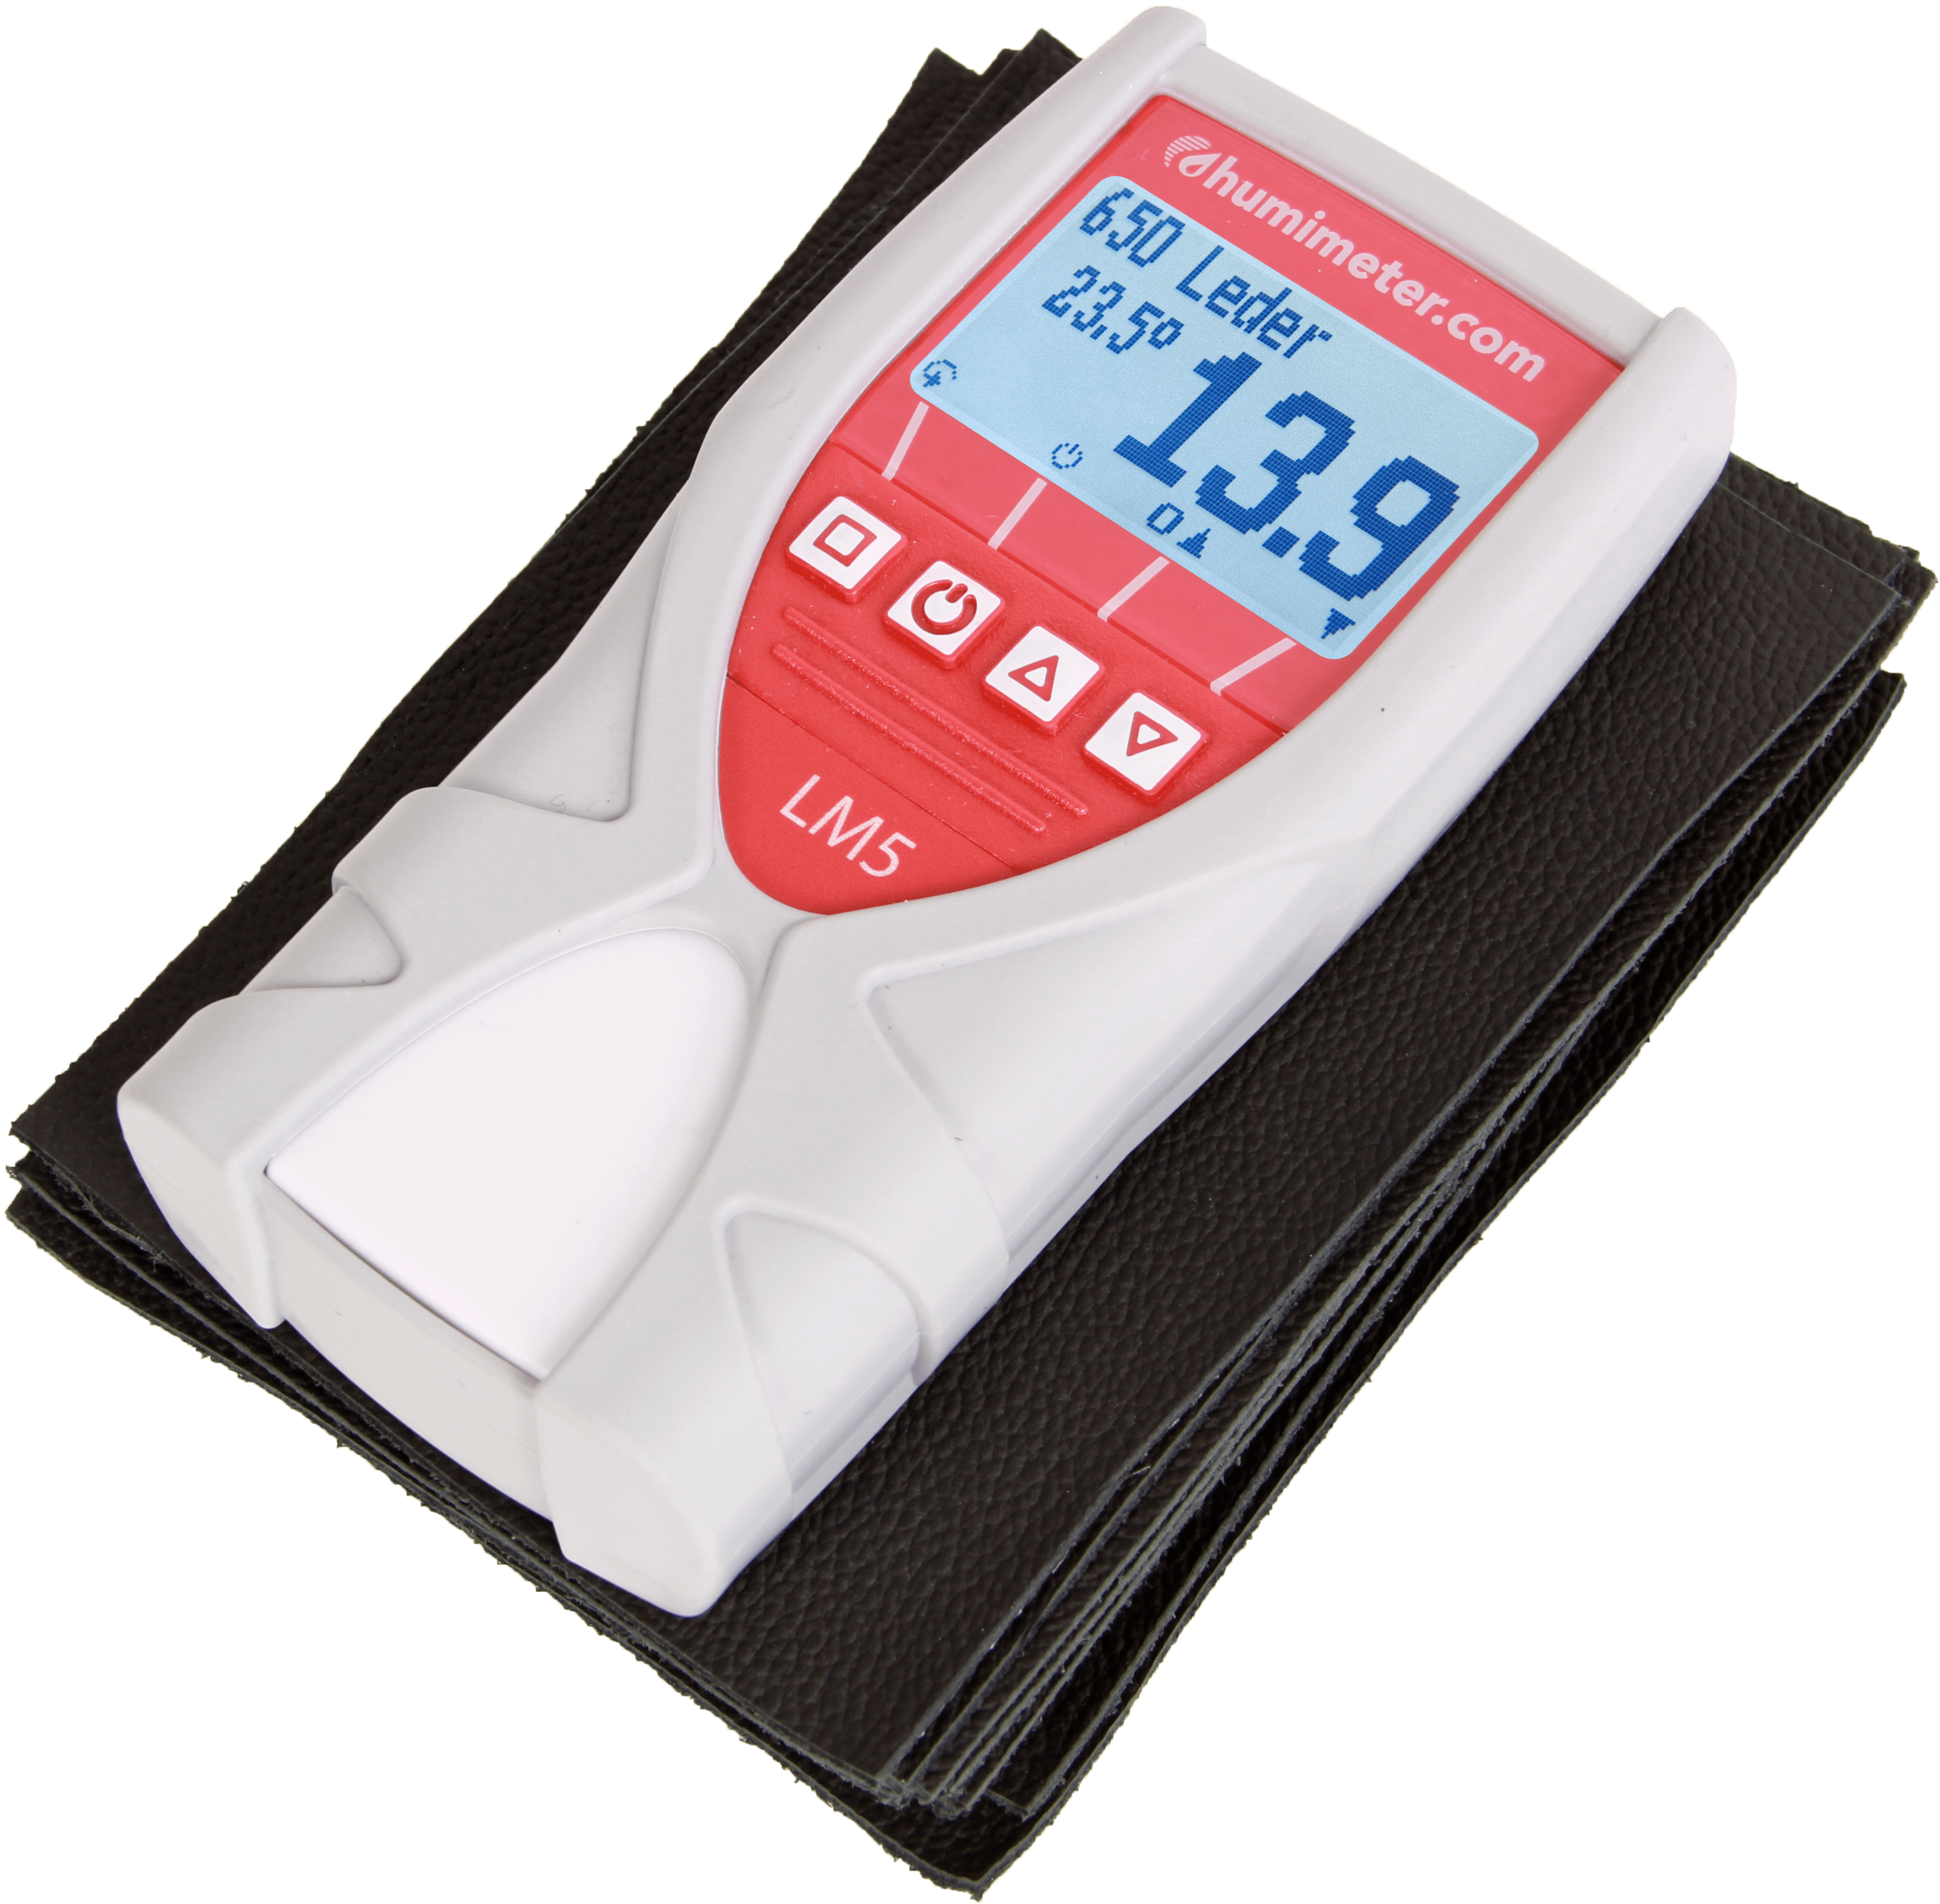 humimeter LM5